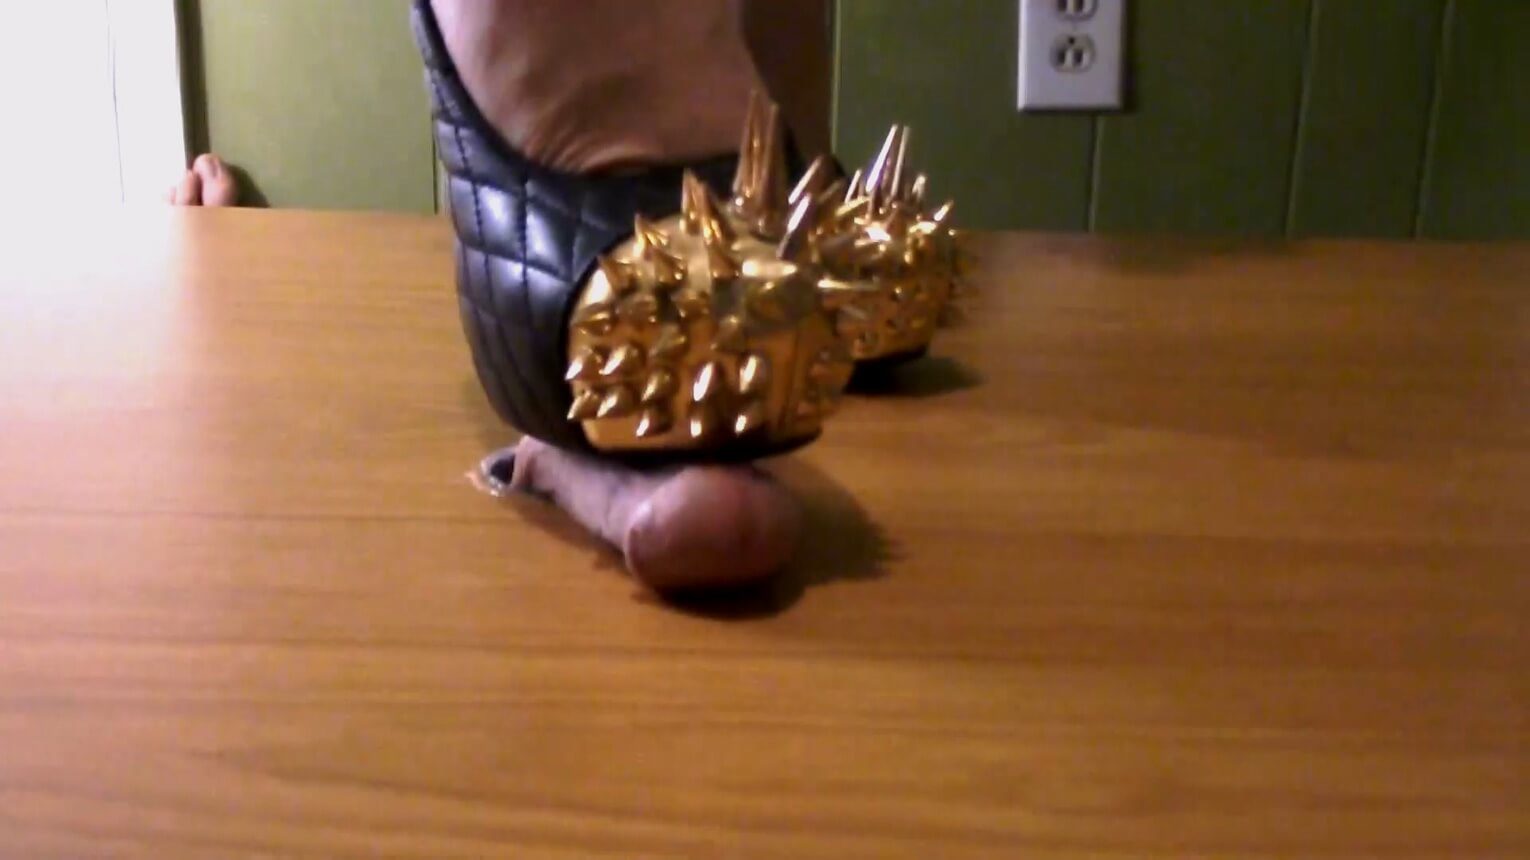 Slaves cam view of his painful cock crush and milking under my Jeffrey Campbell battle spikes!